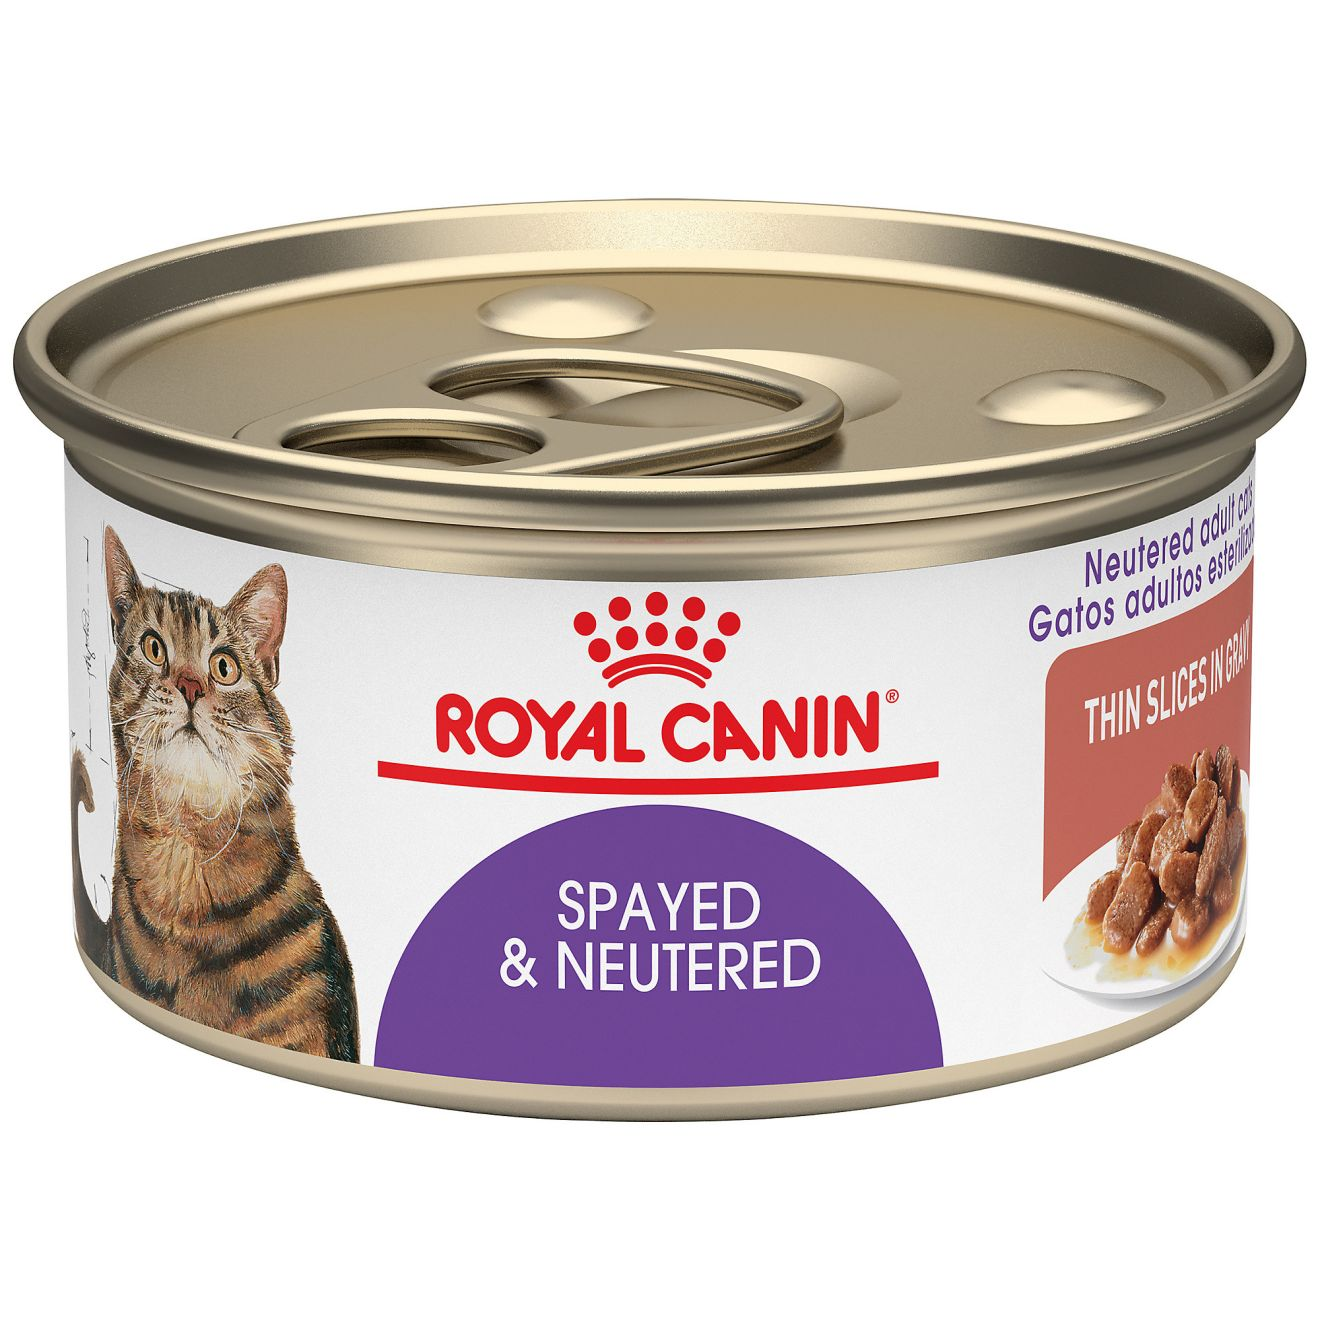 Spayed & Neutered Thin Slices in Gravy Canned Cat Food